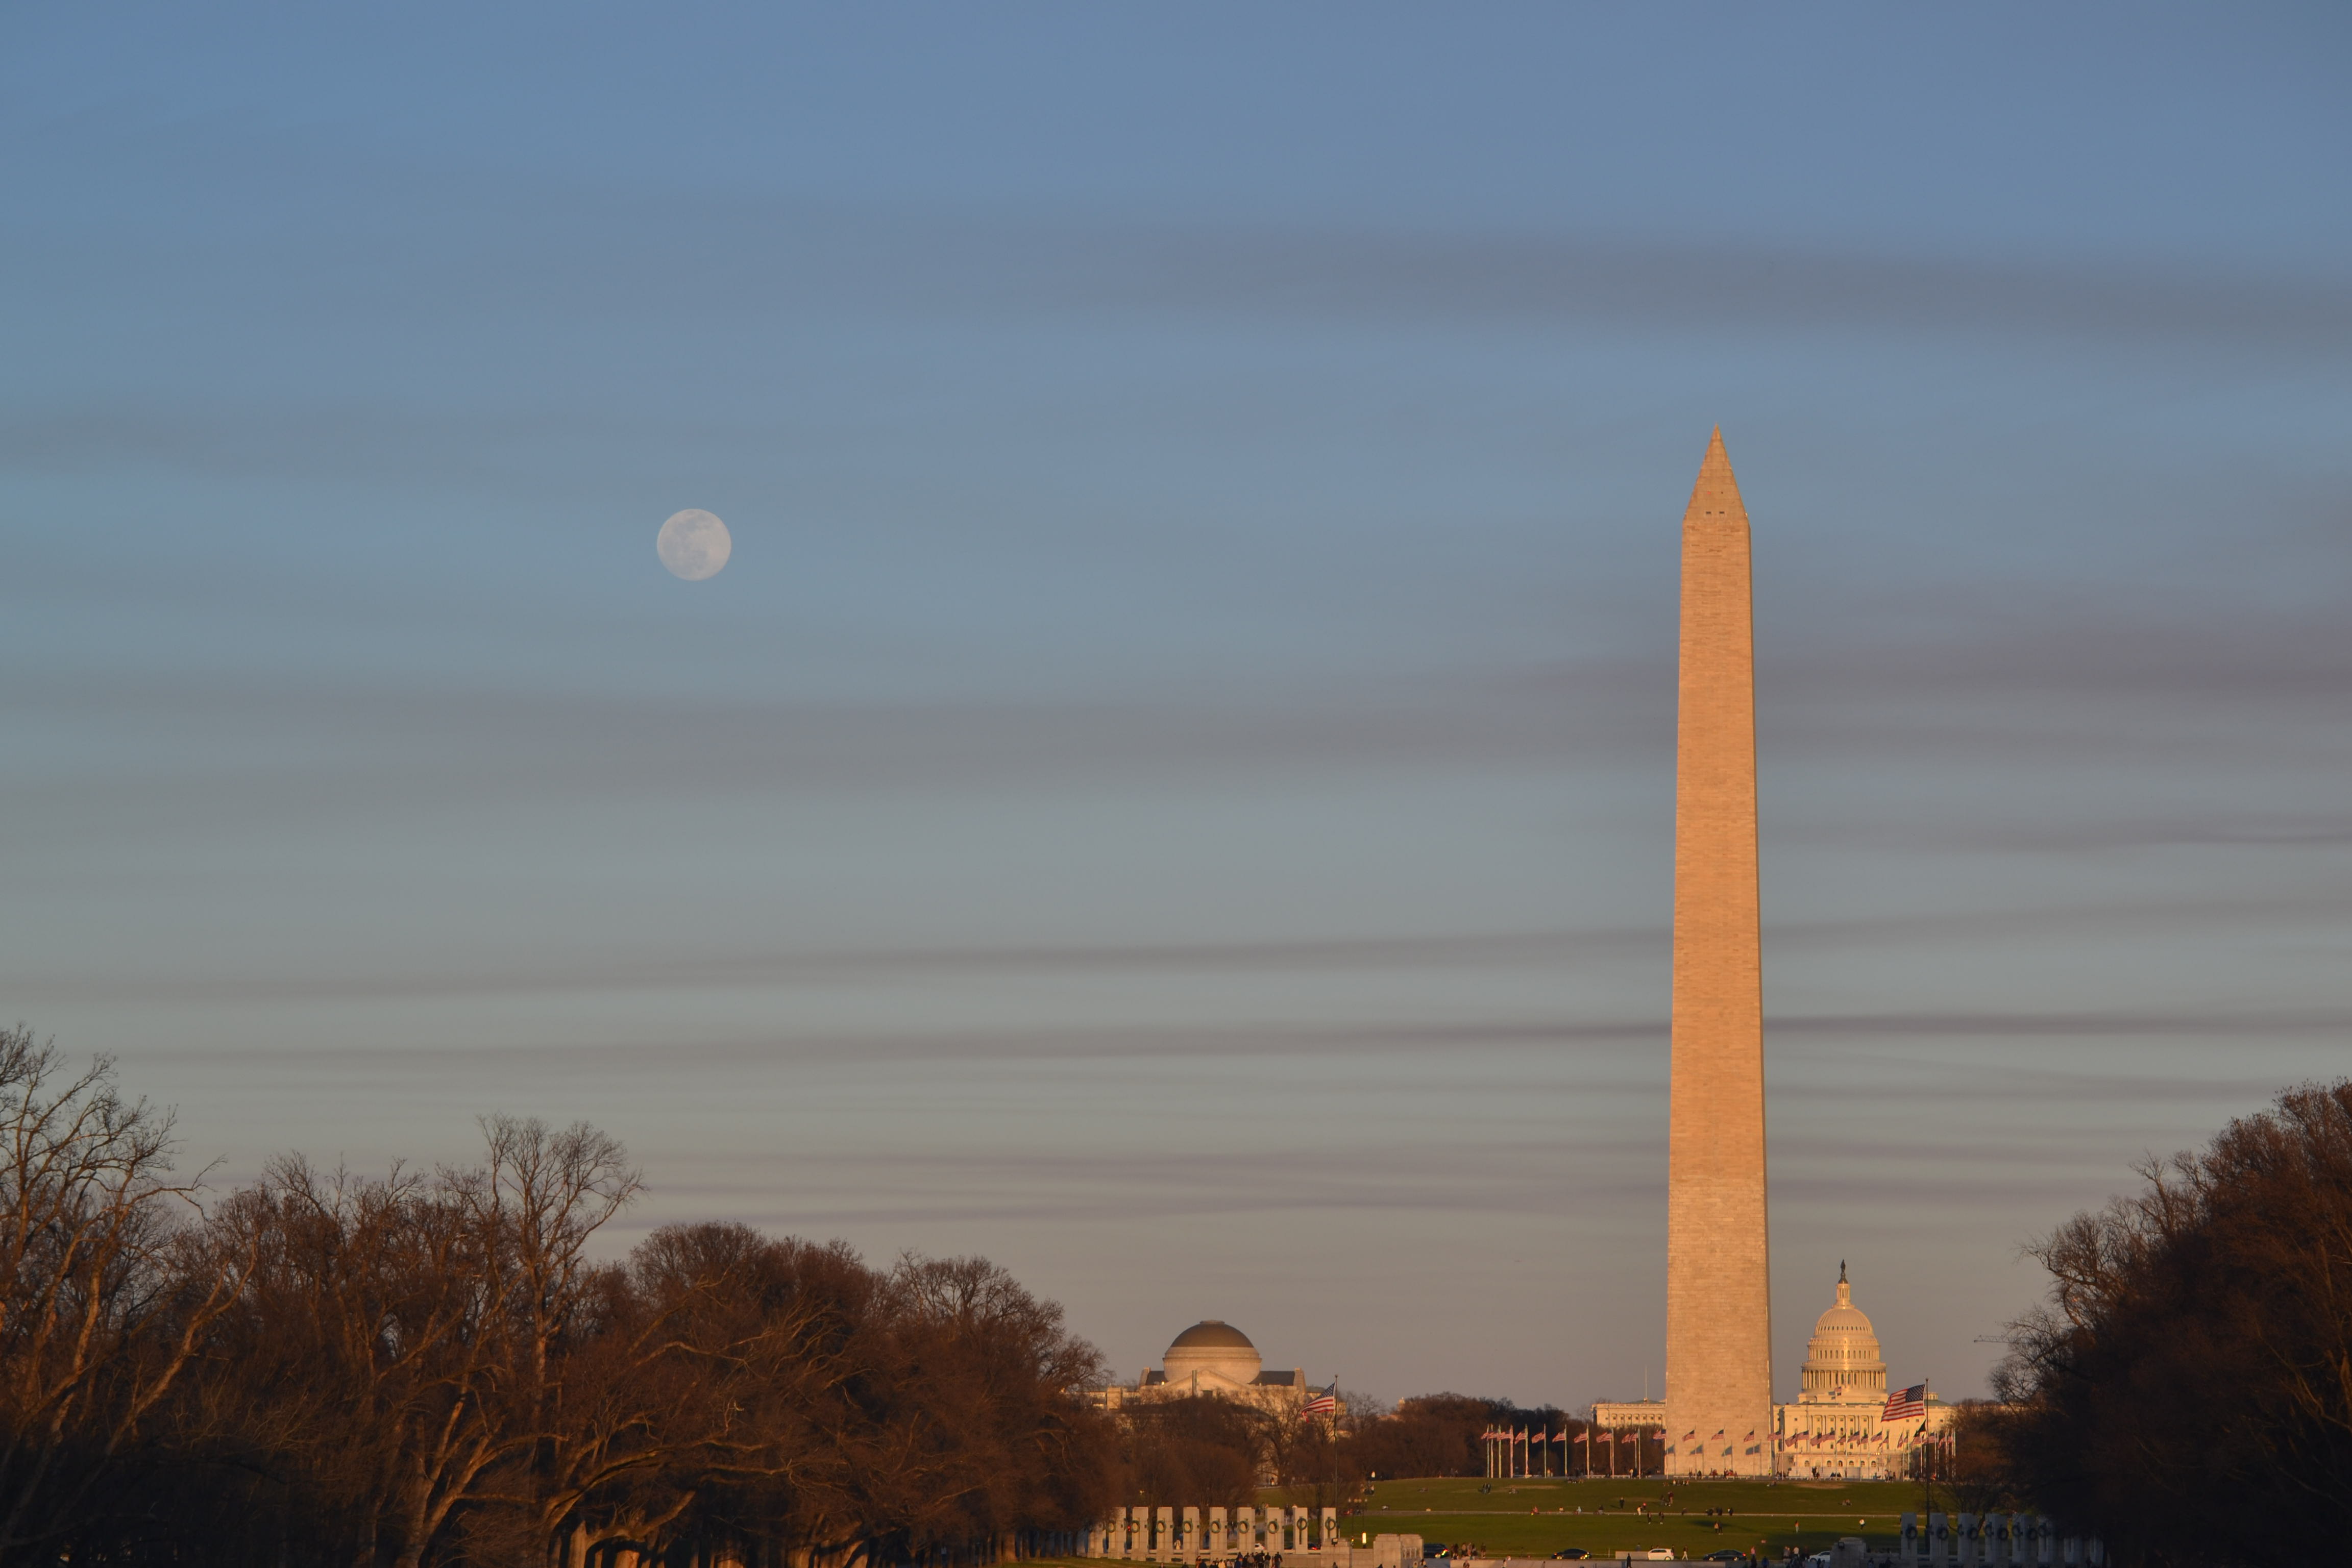 The moon rises over bare trees, at a height similar to the obelisk, sunset-bathed, before a white, domed building.